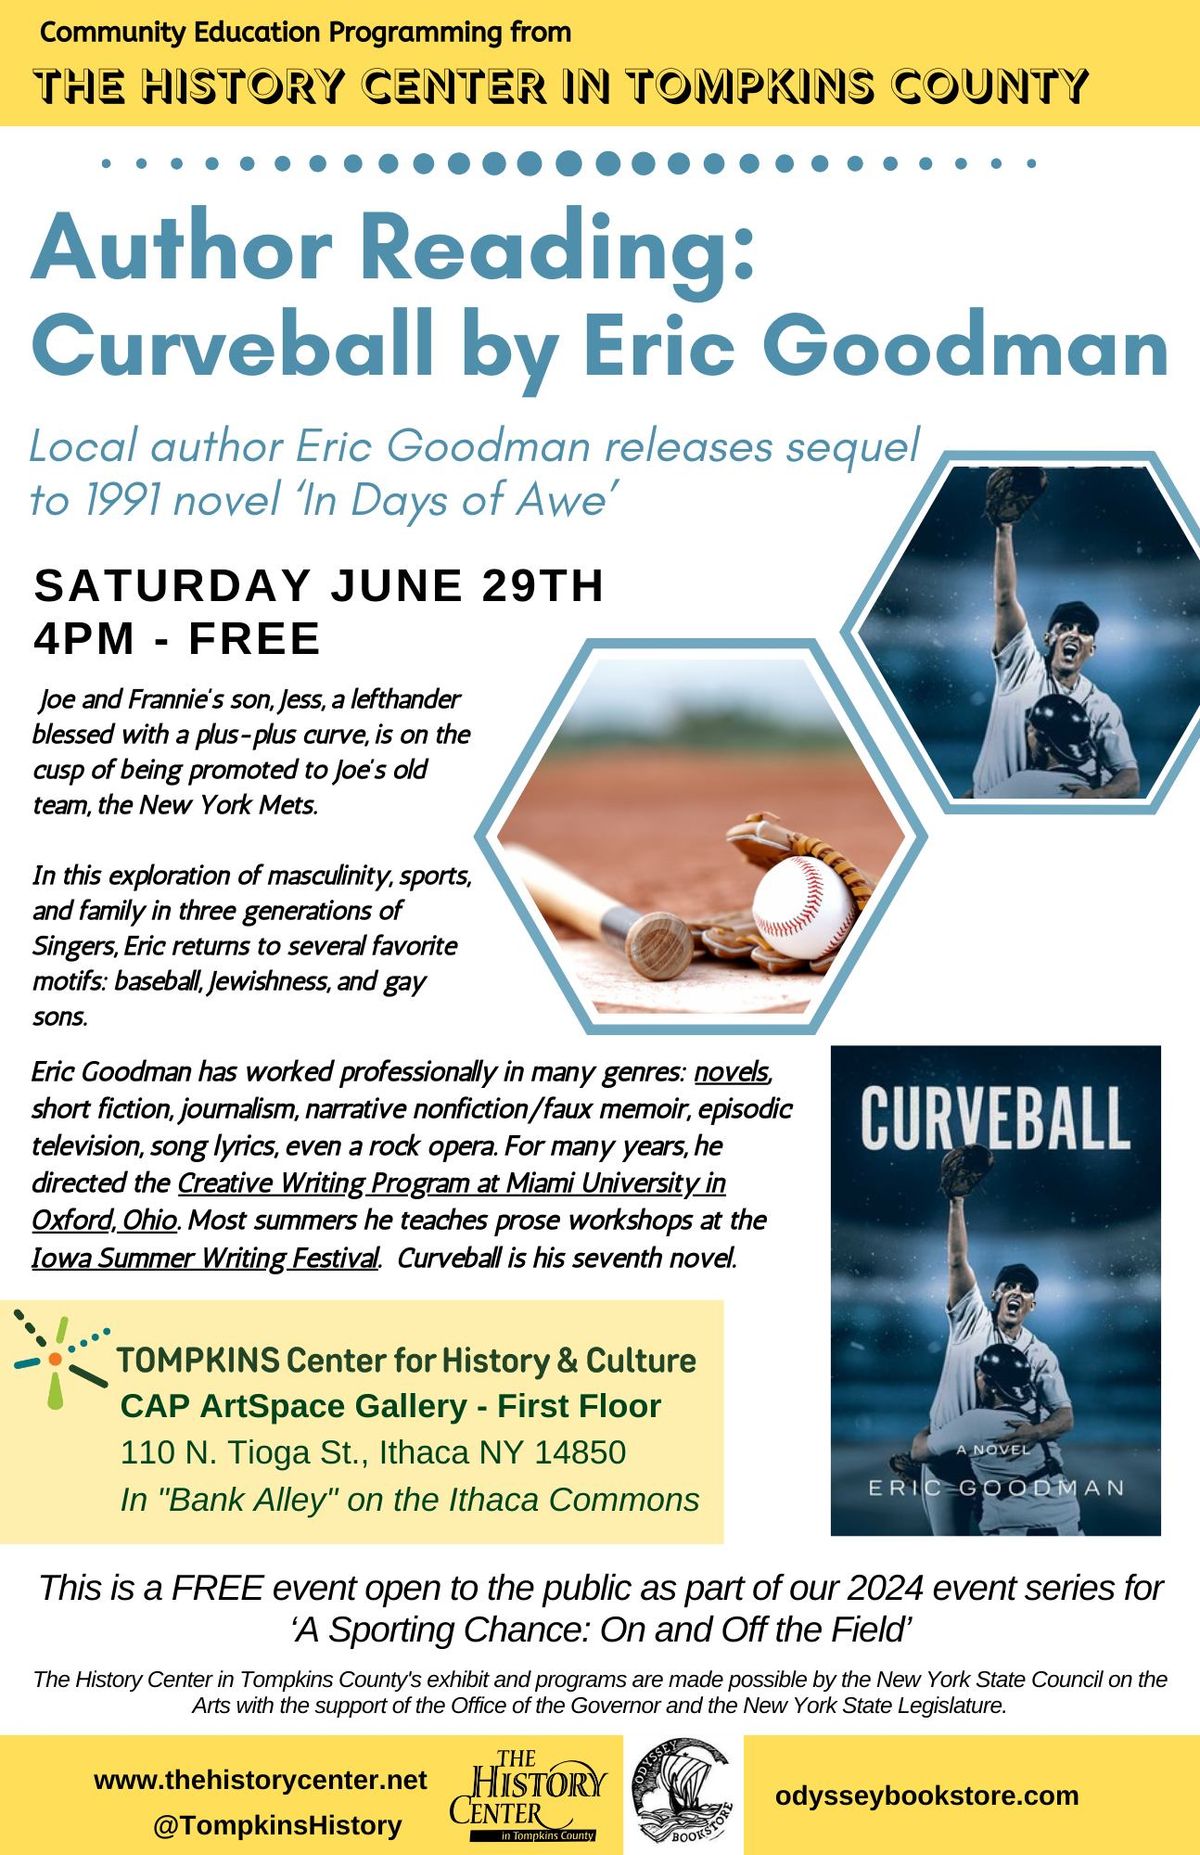 Curveball - Author Reading by Eric Goodman @ The History Center